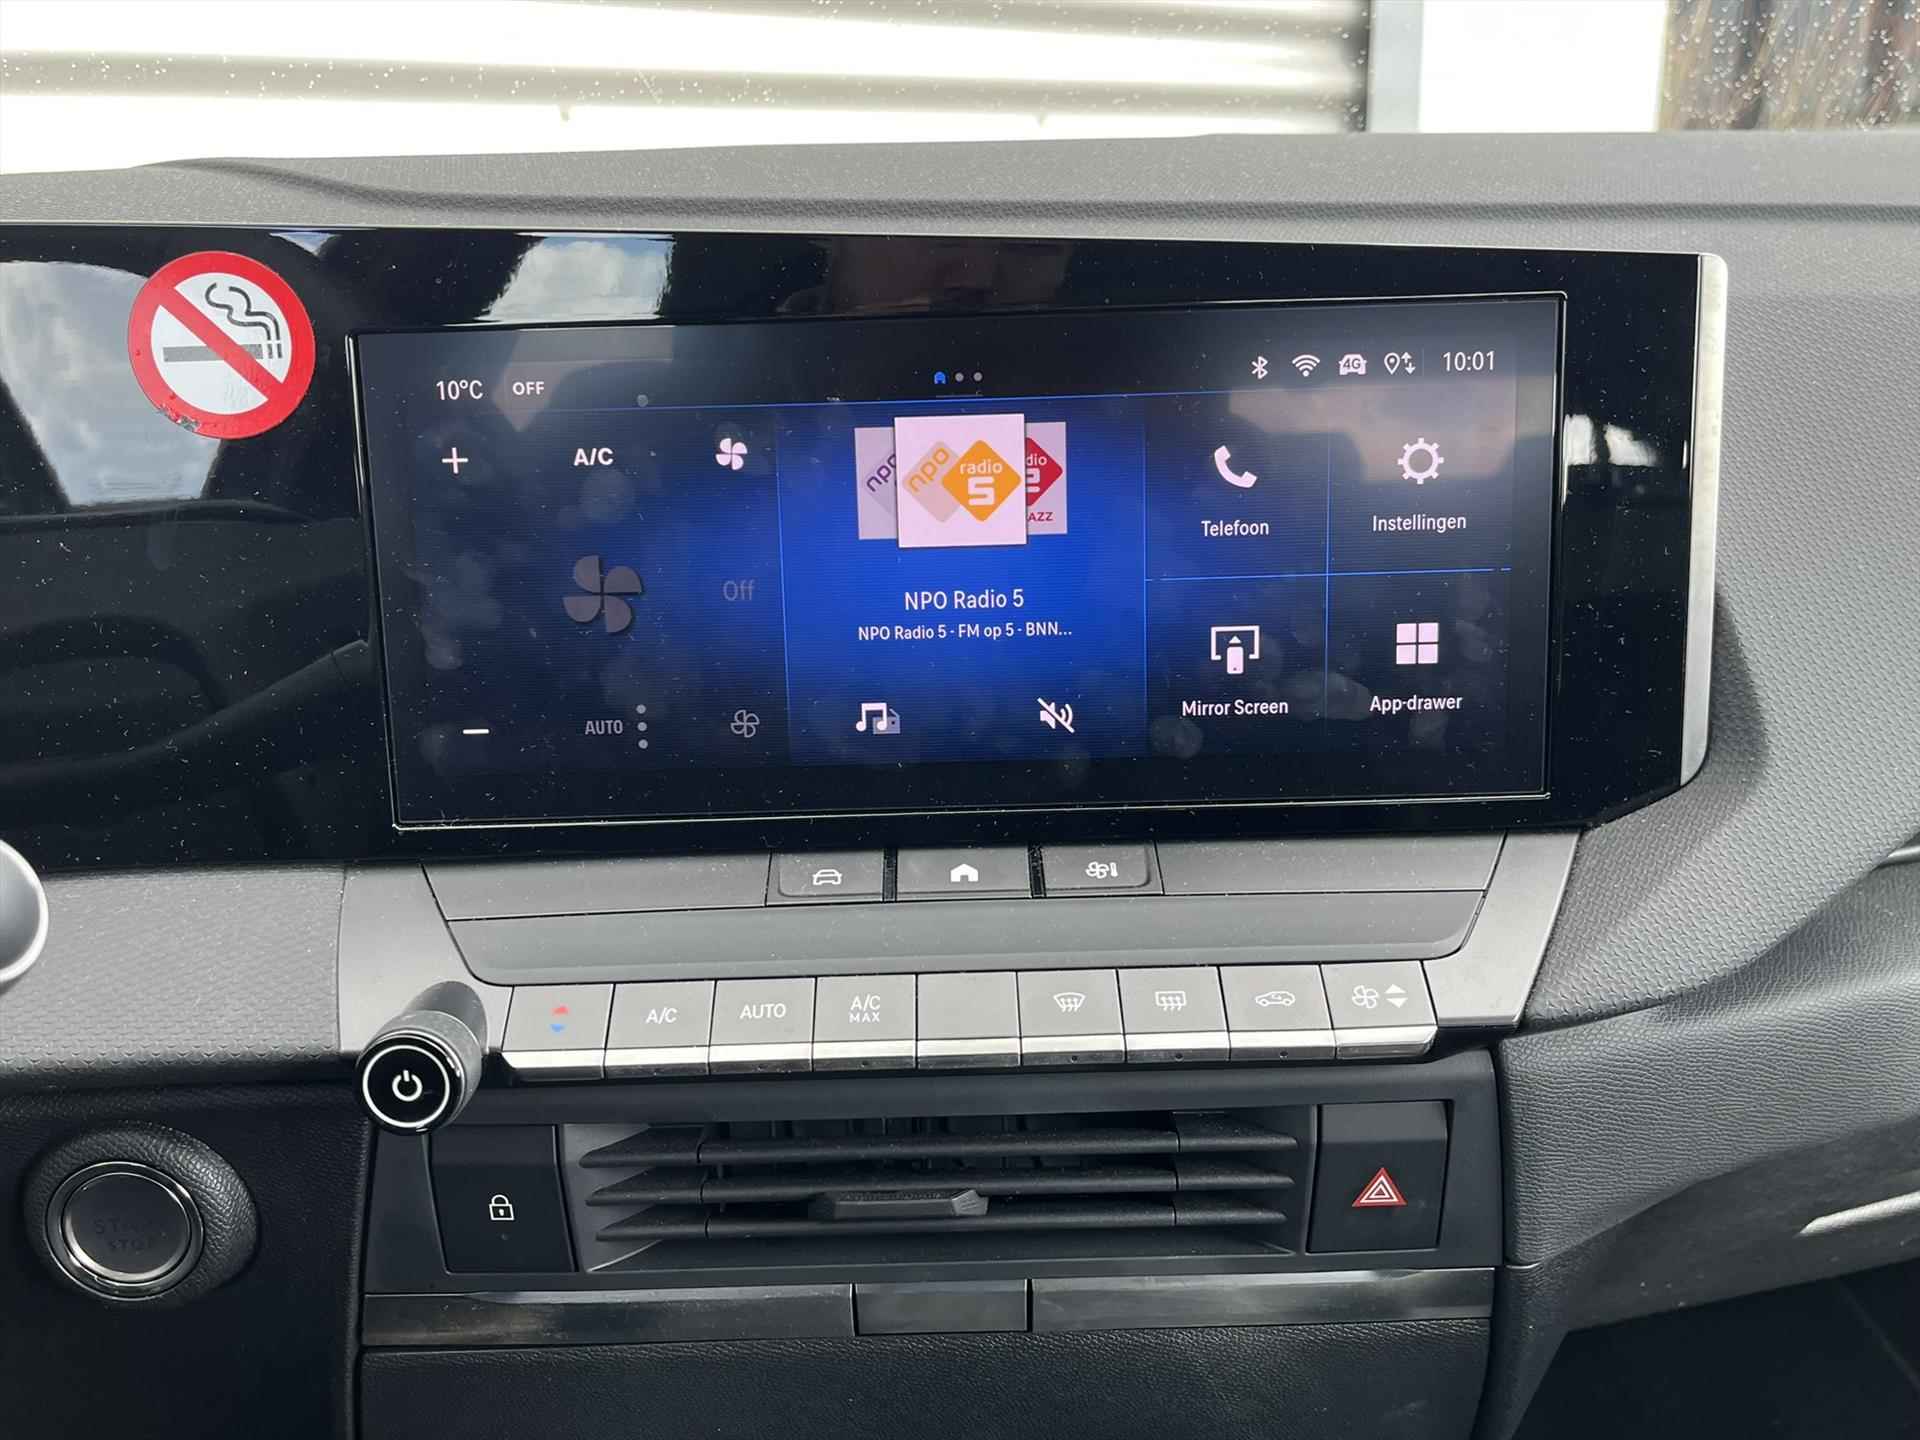 OPEL Astra 1.2 Turbo 110pk Start/Stop Edition | Navigatie | Apple CarPlay / Android Auto | Climate Control - 12/25